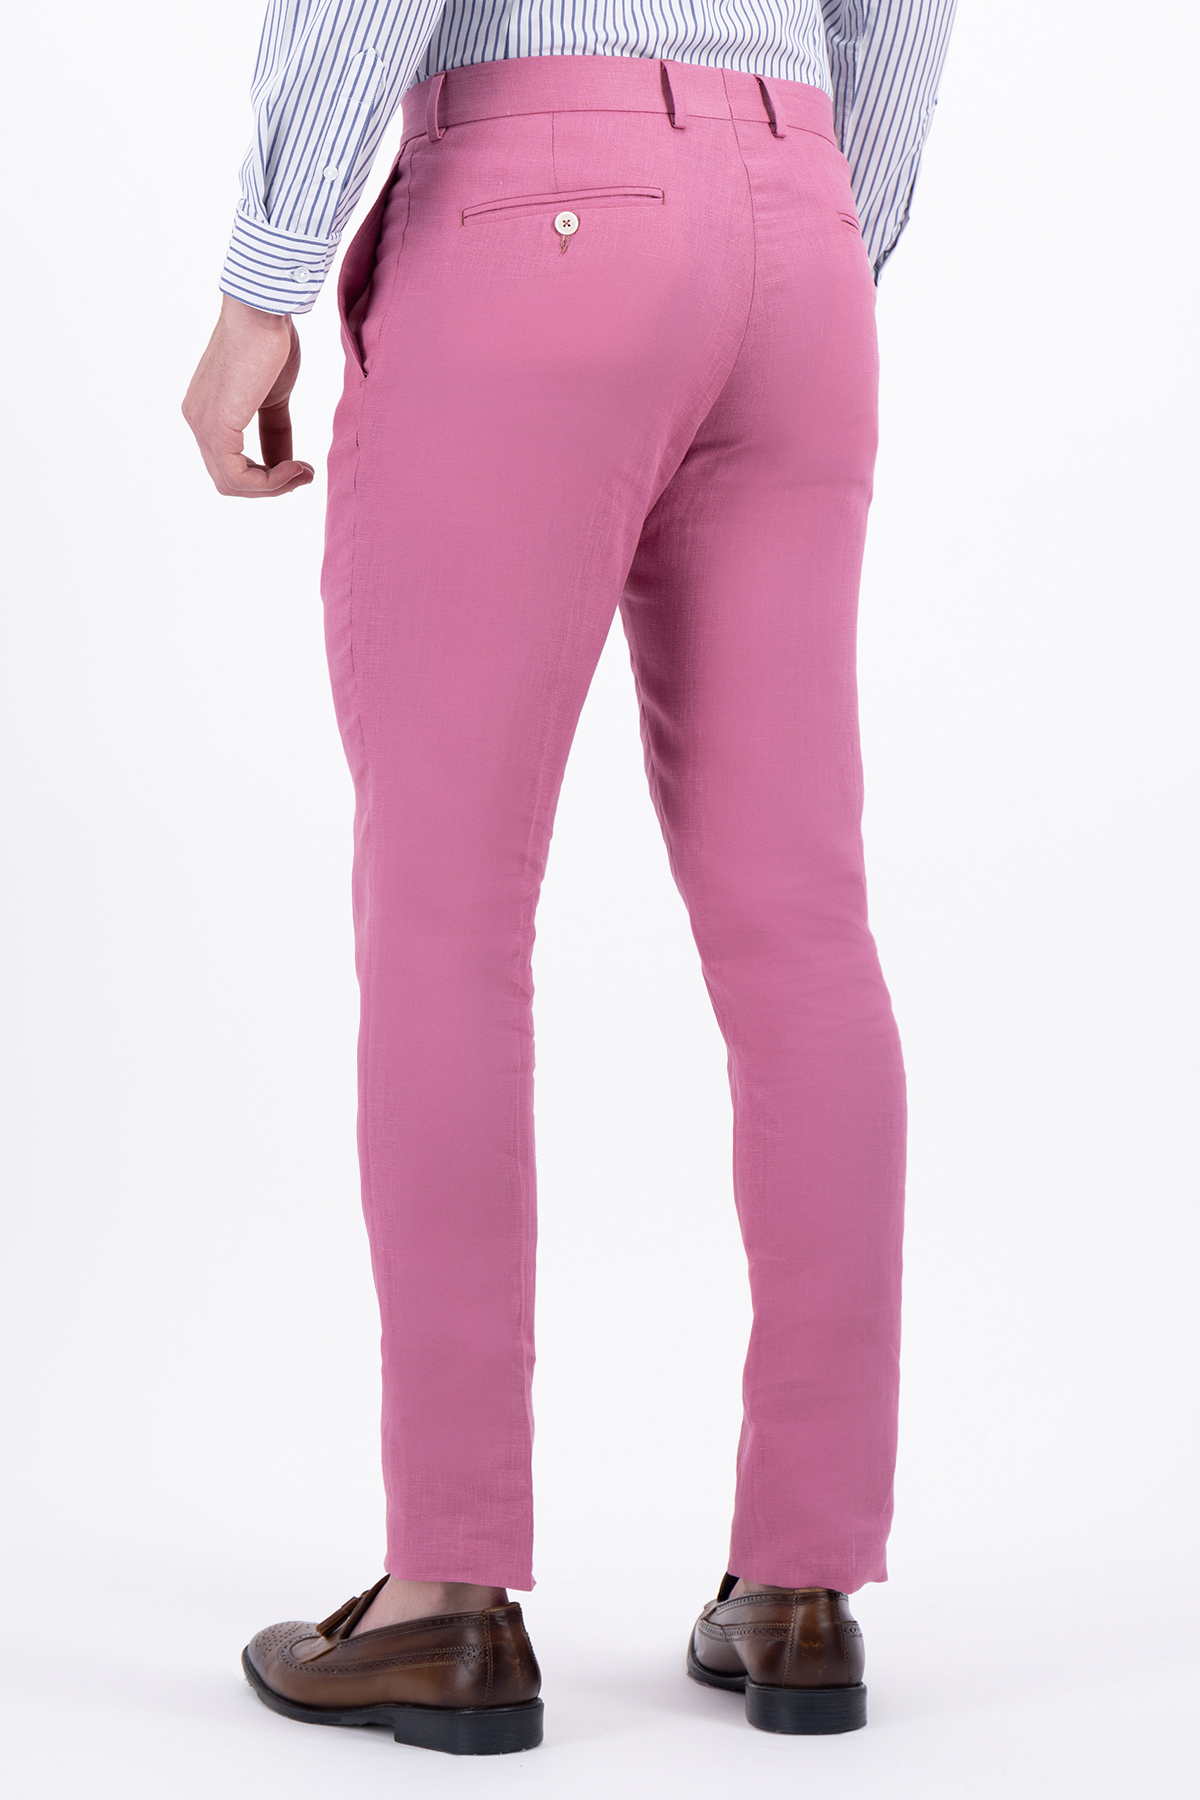 PANTALÓN SEPARATE ROSA OBSCURO SLIM FIT LMENTAL image number null